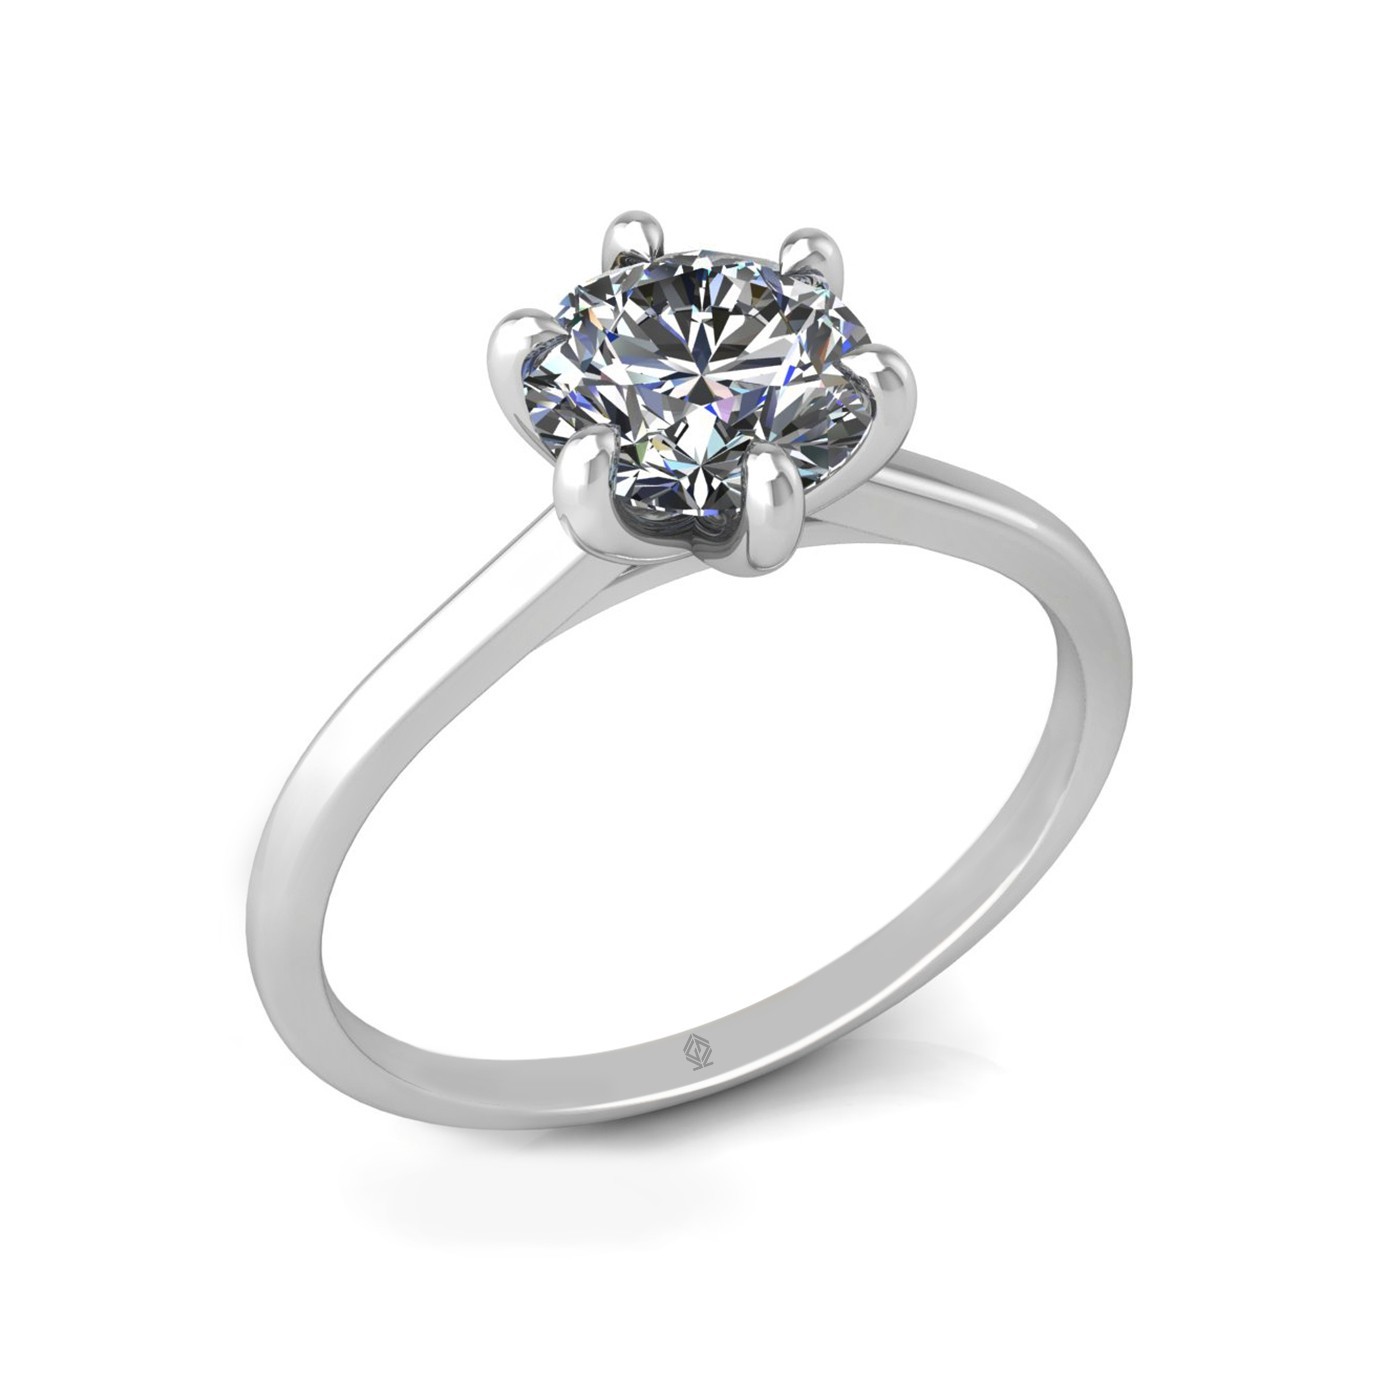 18K WHITE GOLD 6 PRONGS SOLITAIRE ROUND CUT DIAMOND ENGAGEMENT RING WITH WHISPER THIN BAND